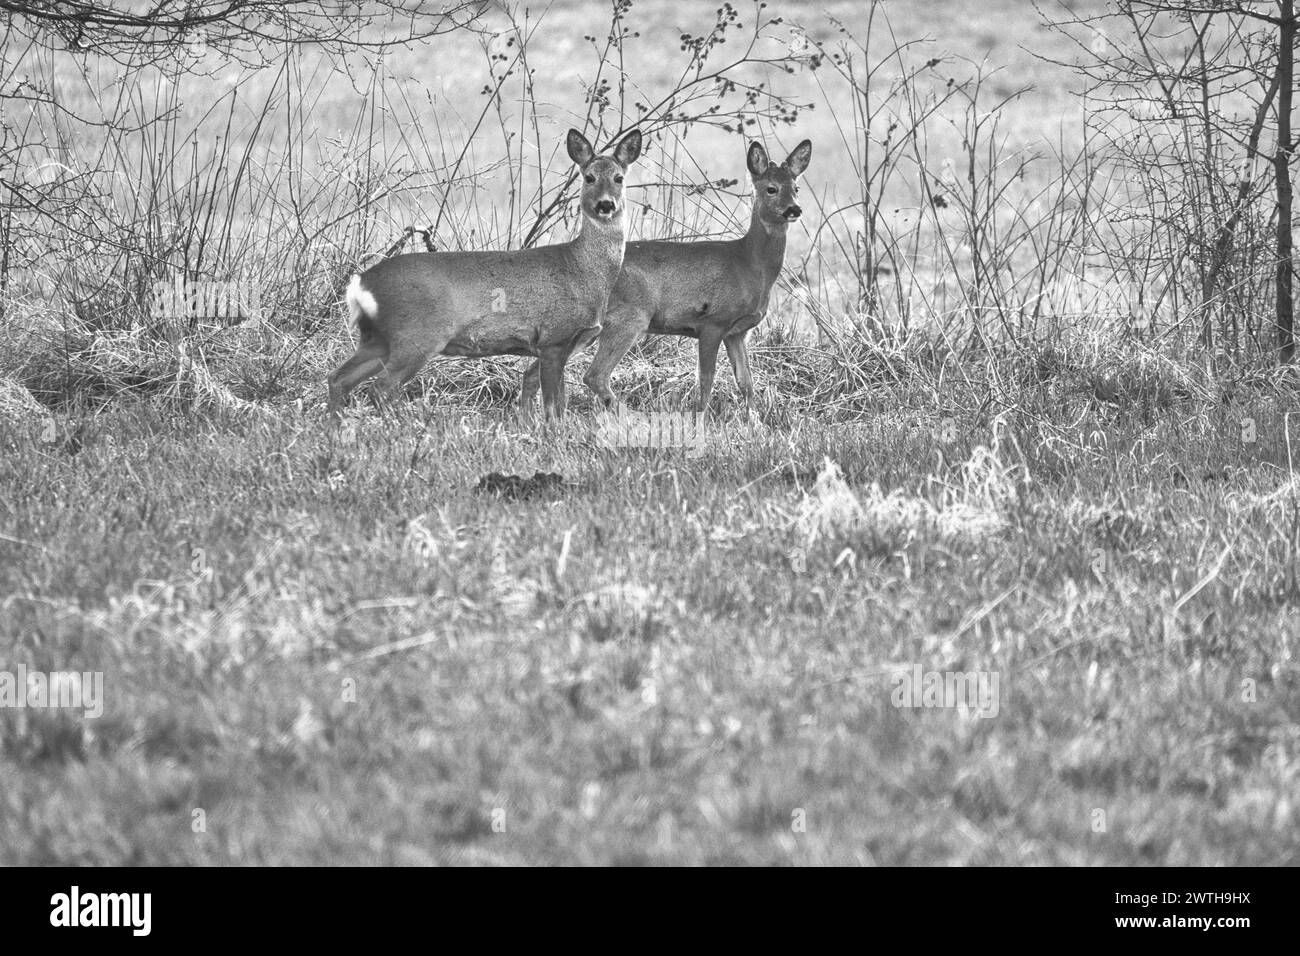 Deer on a meadow, attentive and feeding in black and white. Hidden among the bushes. Animal photo from nature Stock Photo